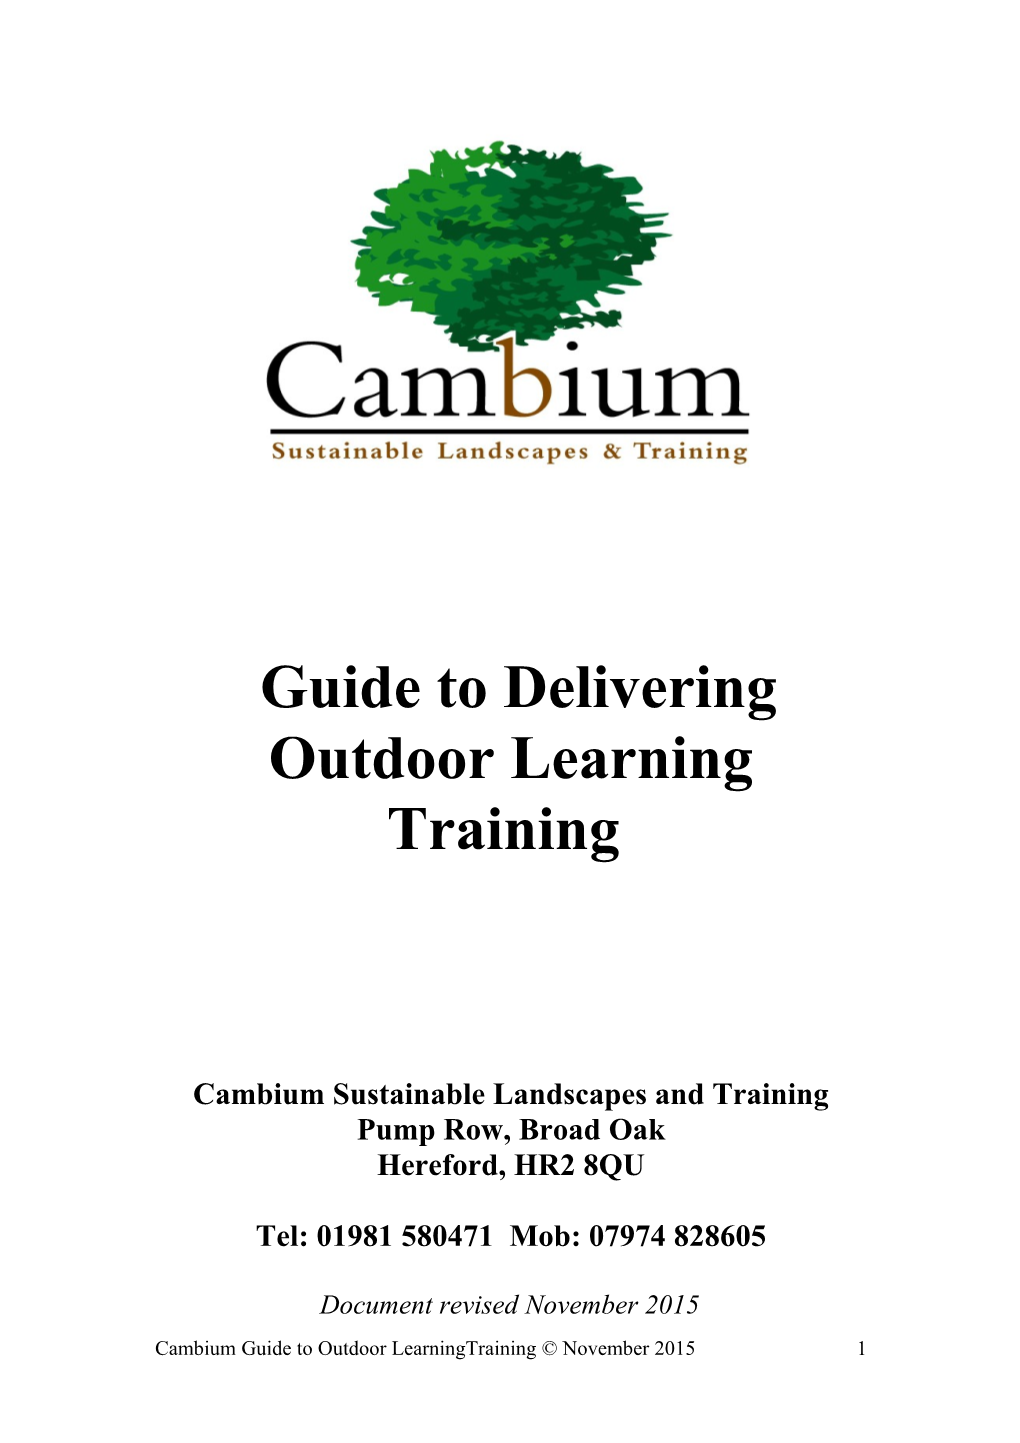 Cambium Sustainable Landscapes and Training